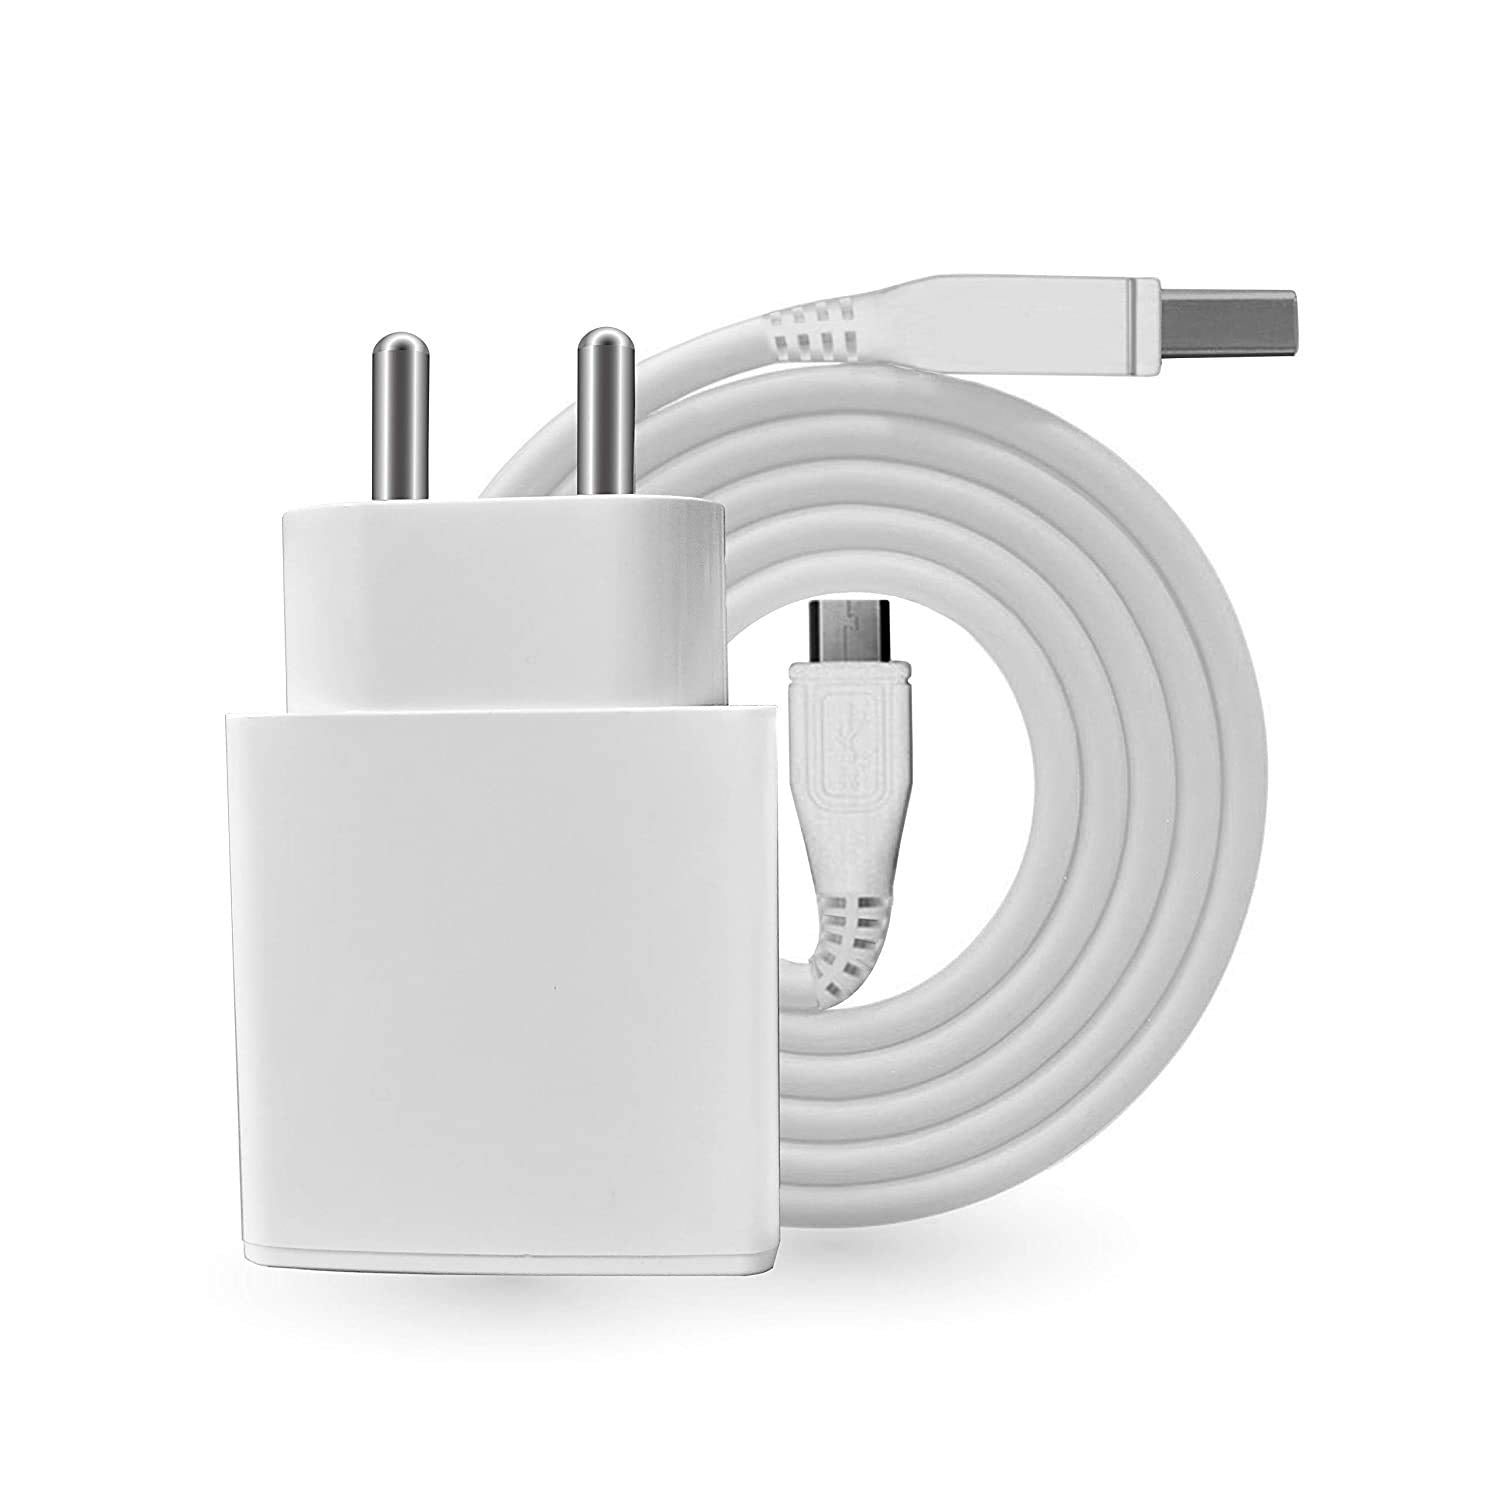 VIVO Y51L 2 Amp Fast Mobile Charger with Cable